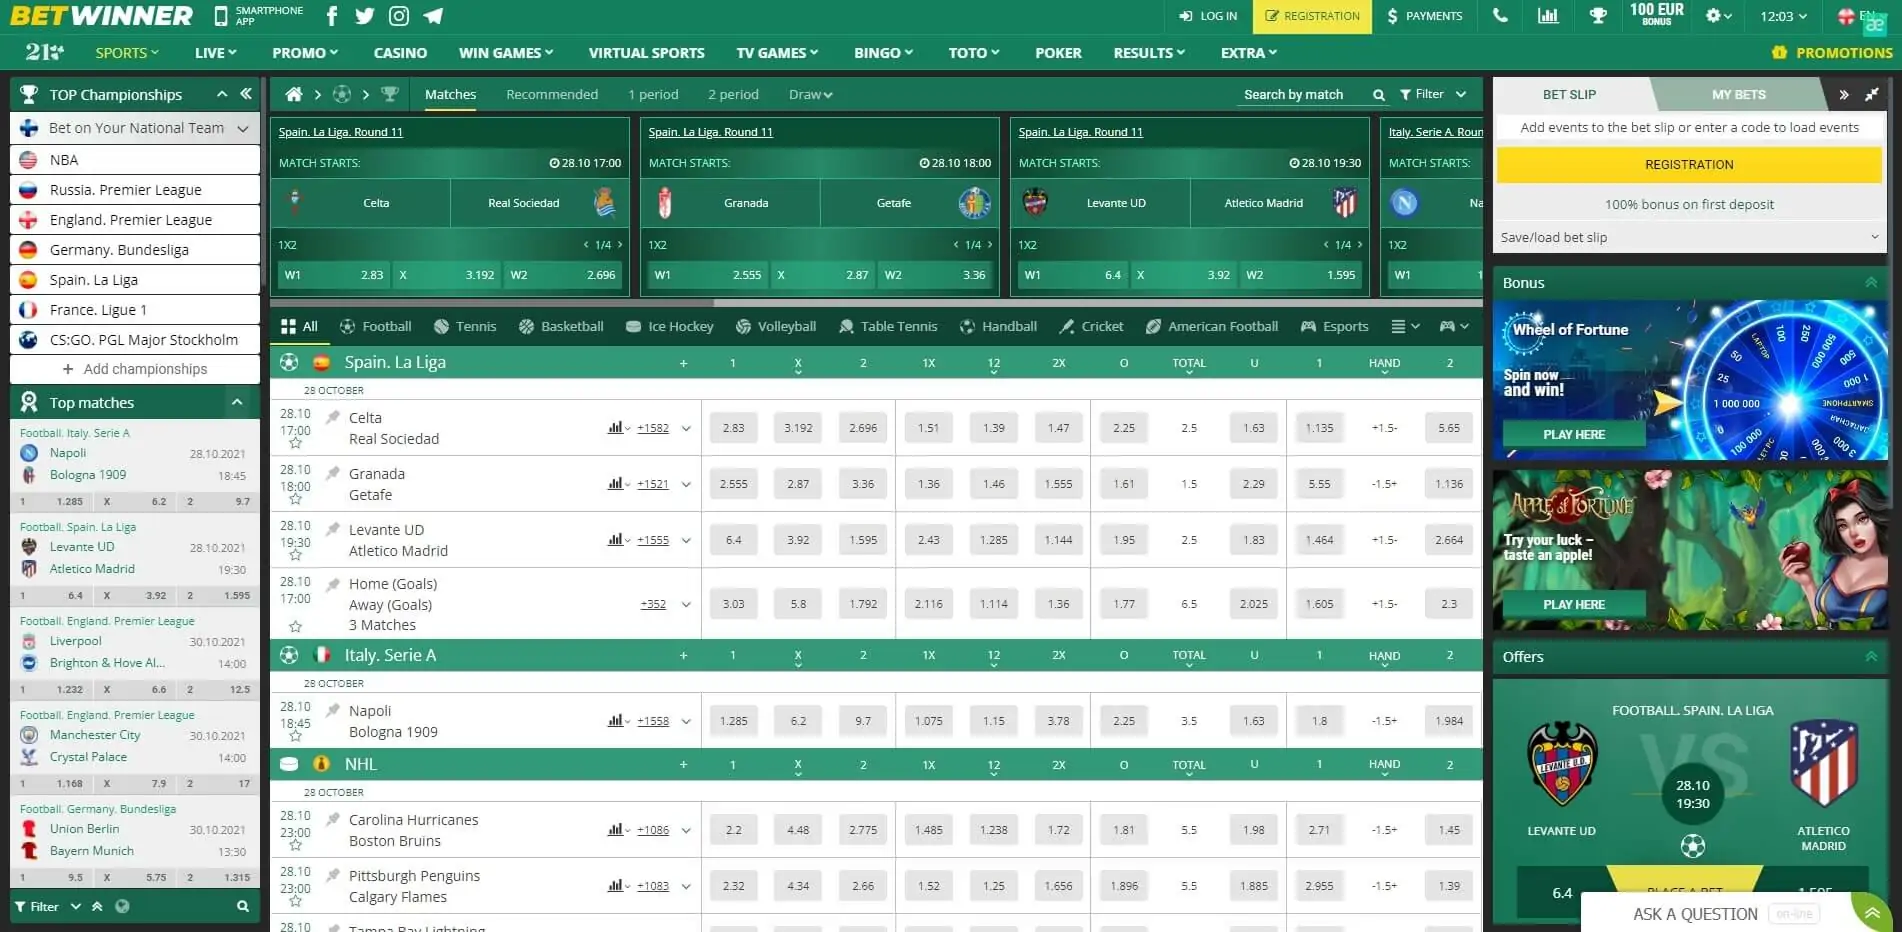 Must Have List Of betwinner Burkina Faso Networks